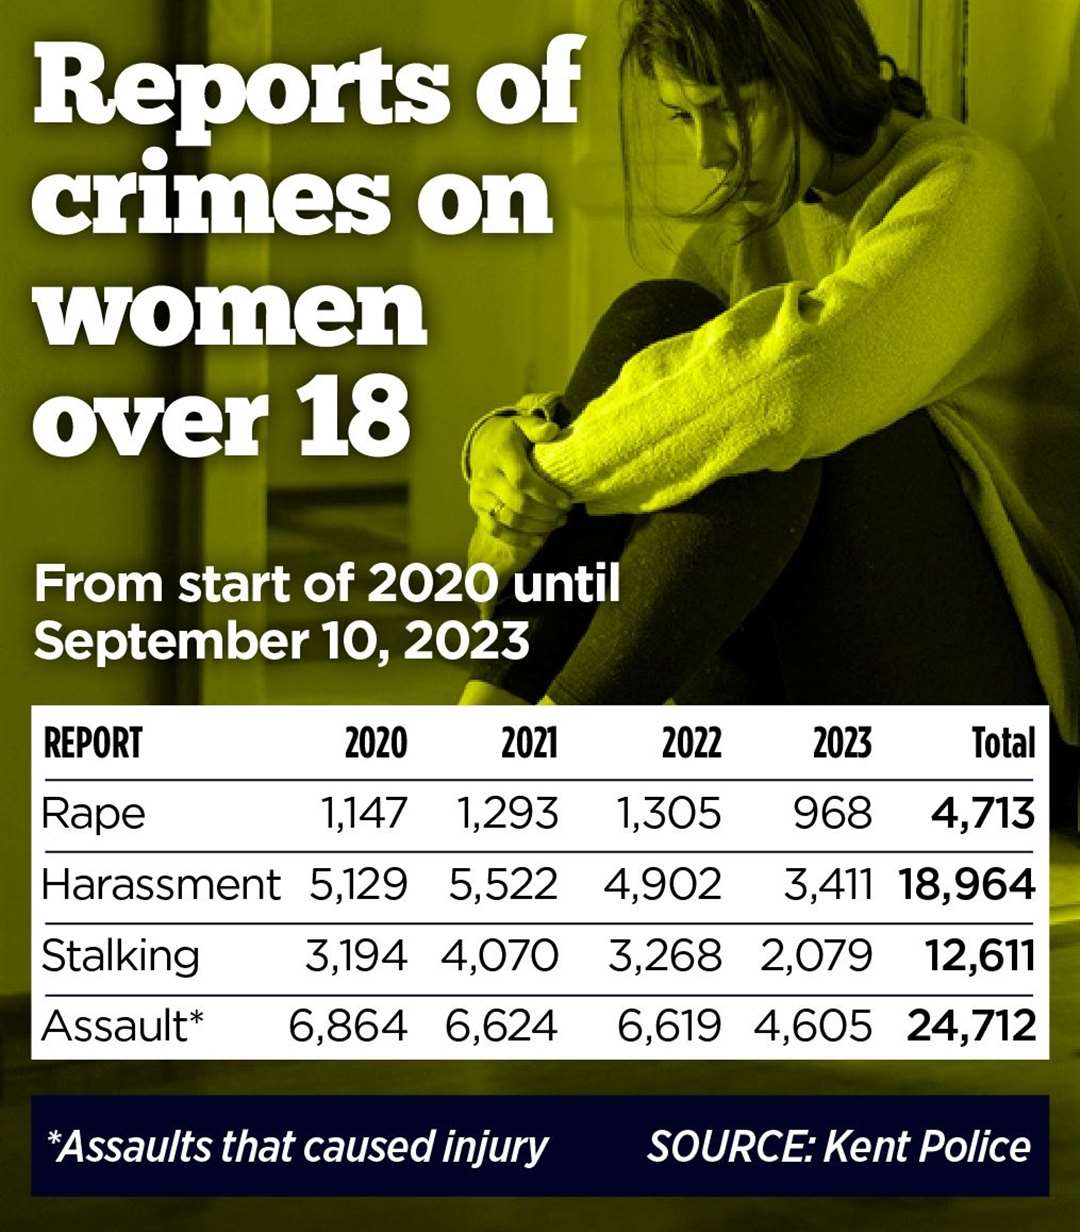 Reports of crimes in Kent on women over 18